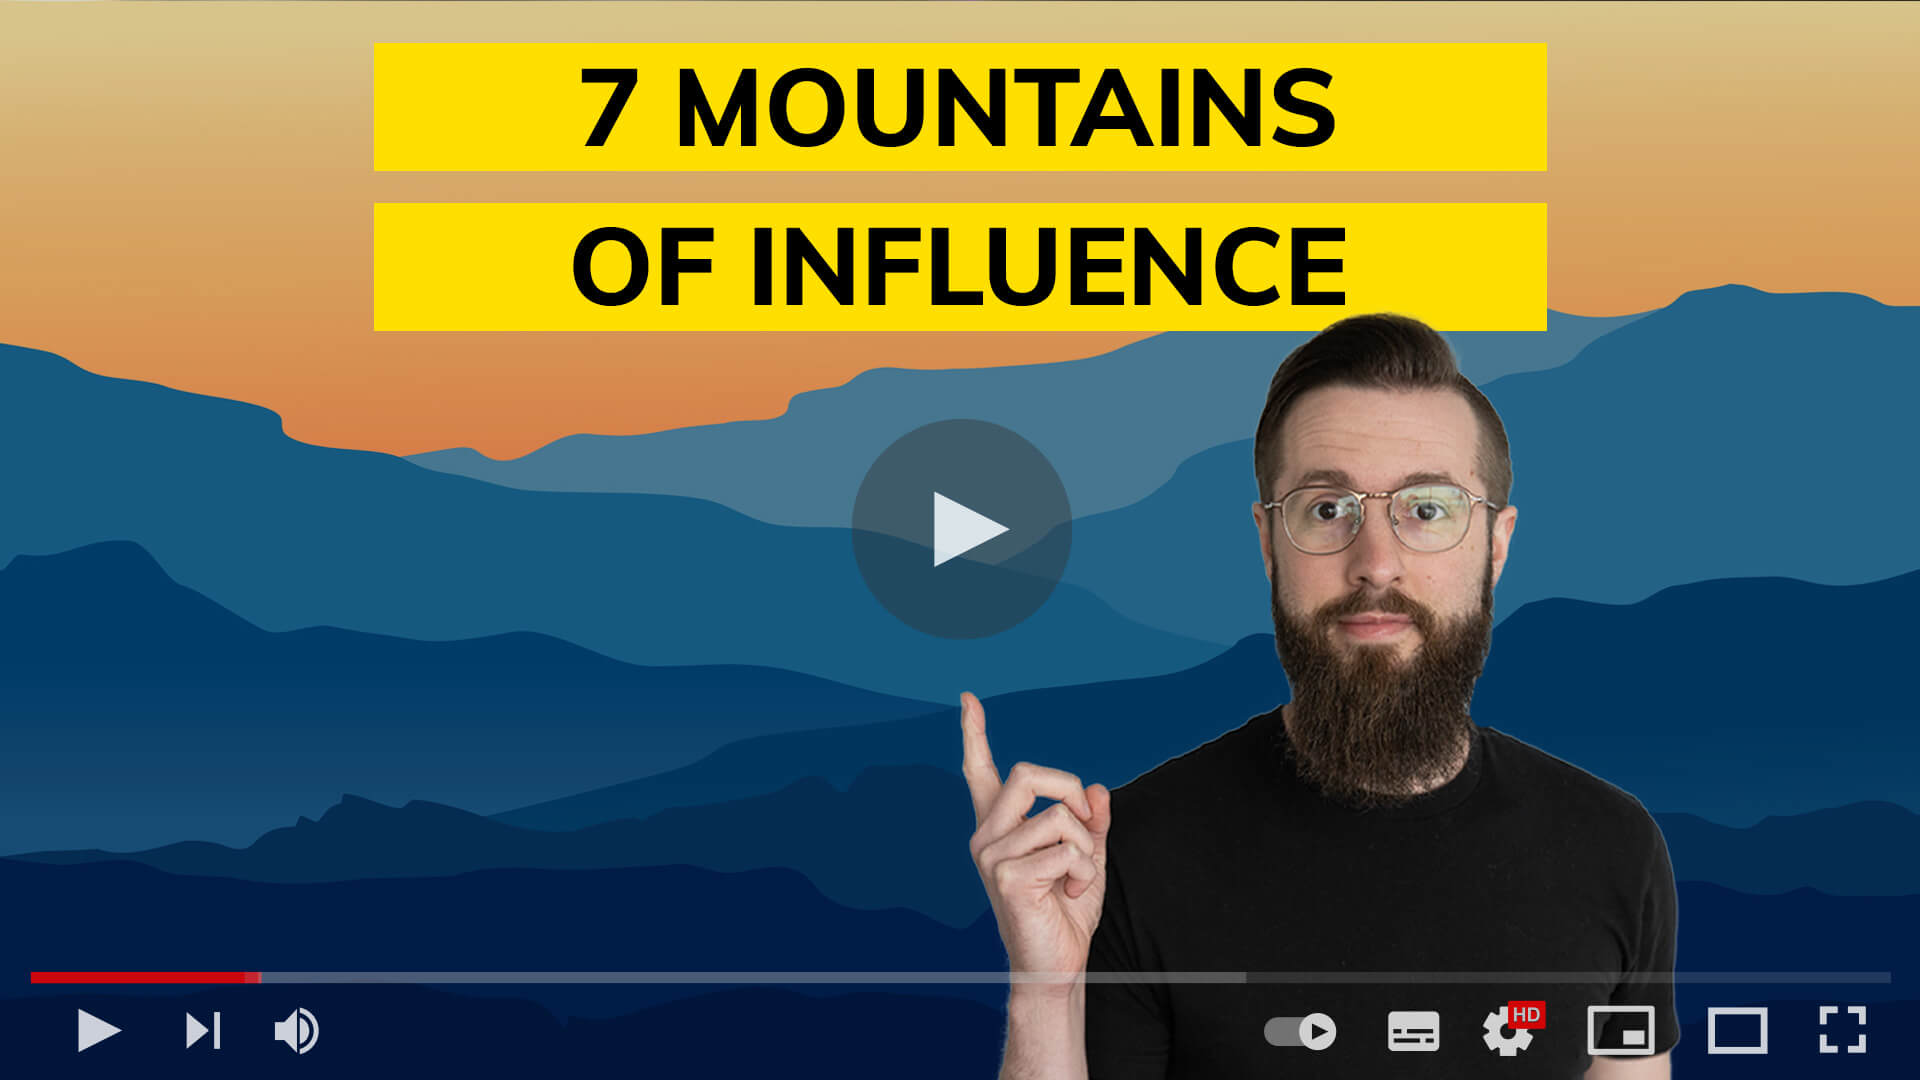 7 Mountains of Influence